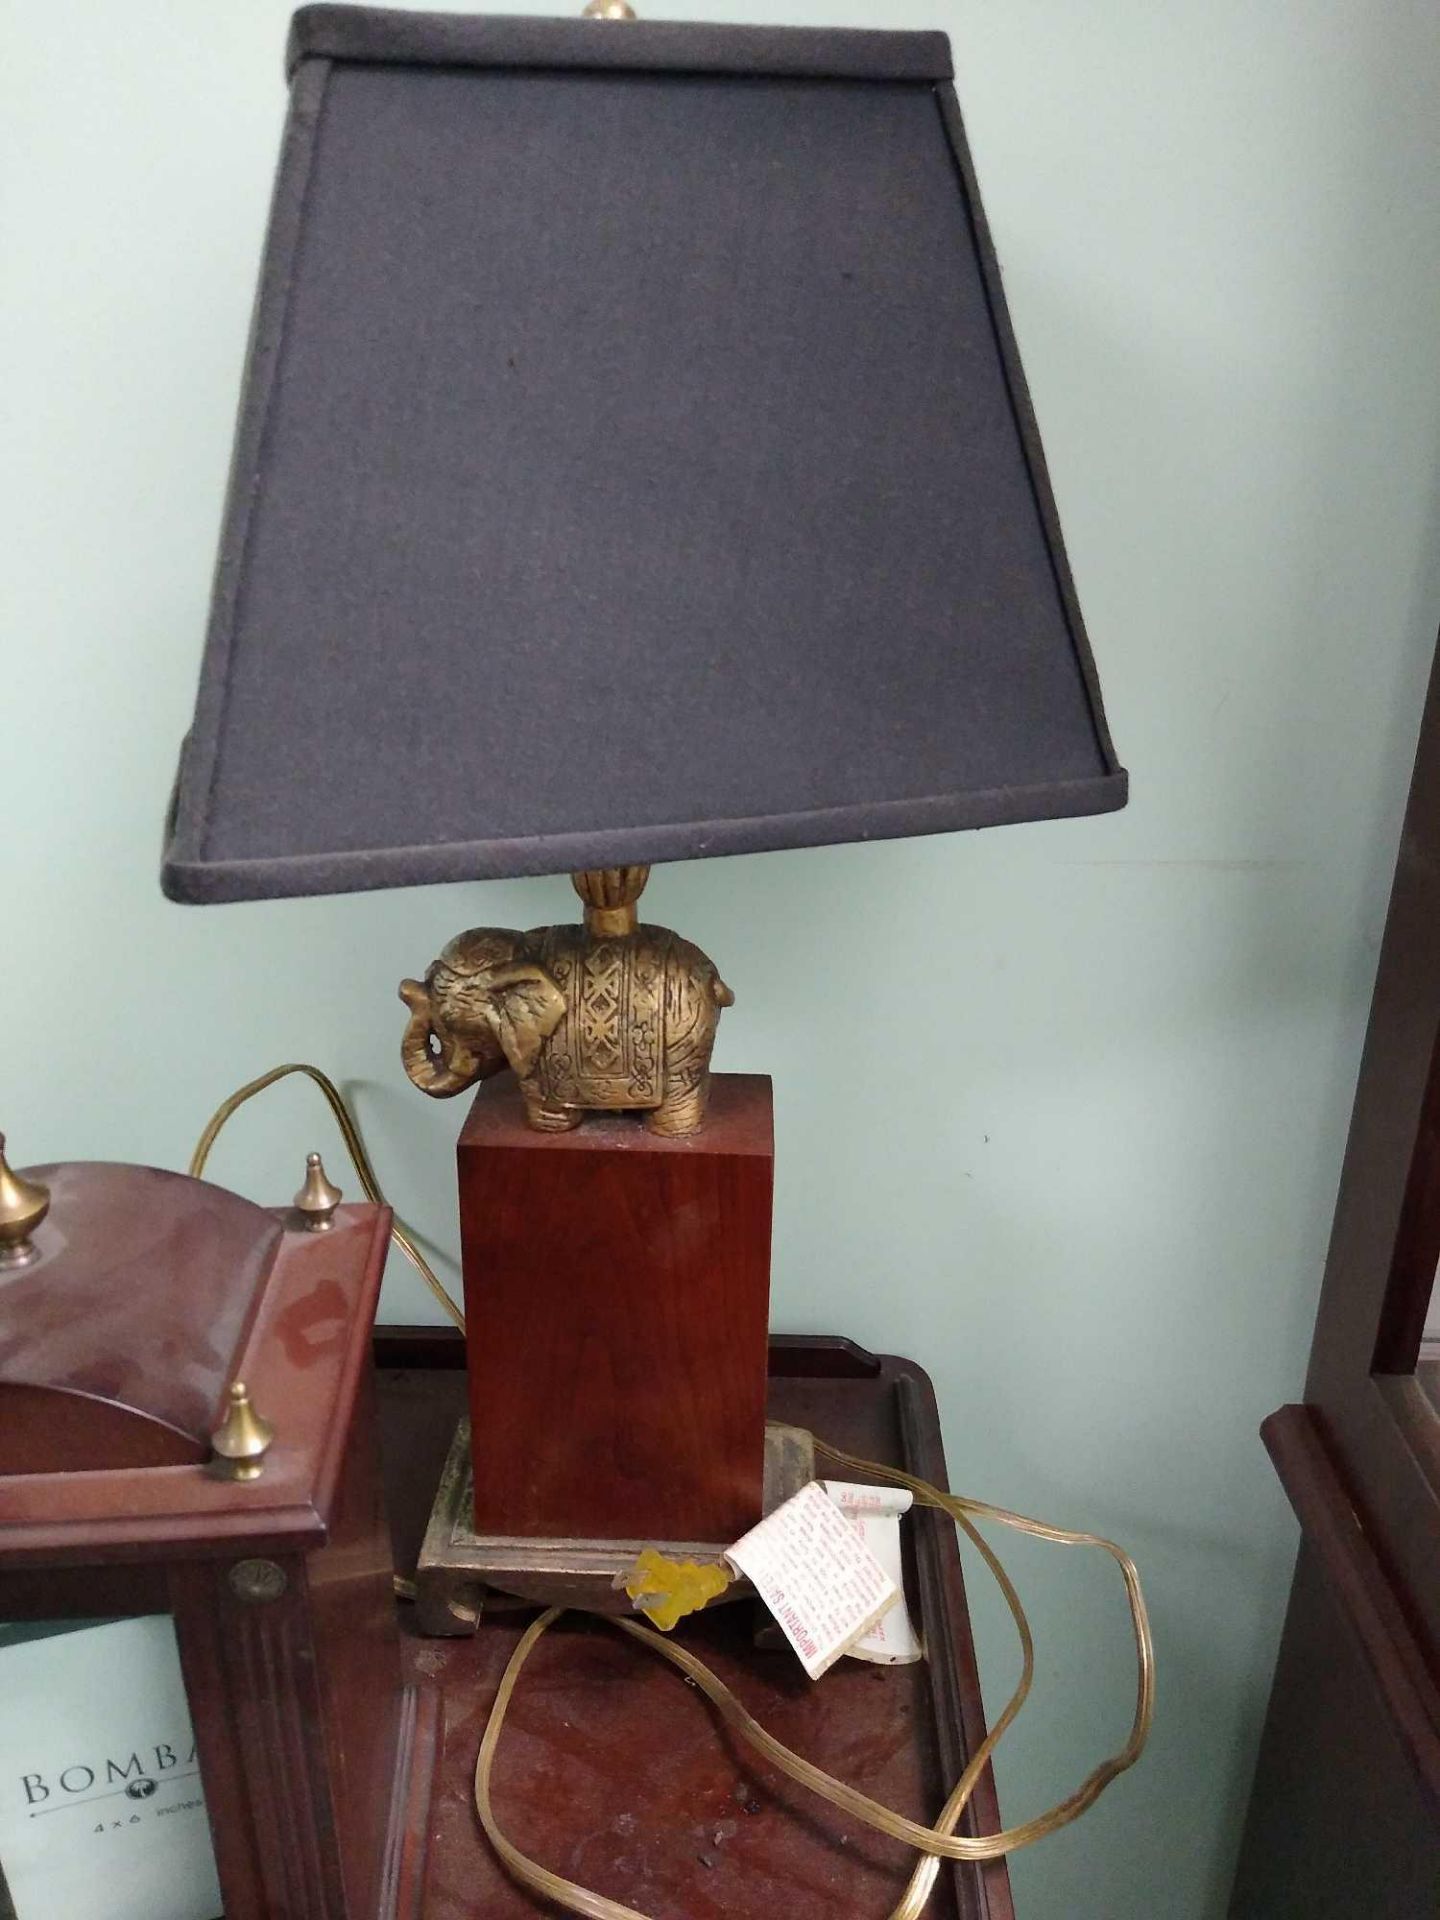 End Table with Decorative Elephant Lamp, Photo Album Display, and Decorative Frog Planter Table Dime - Image 6 of 15